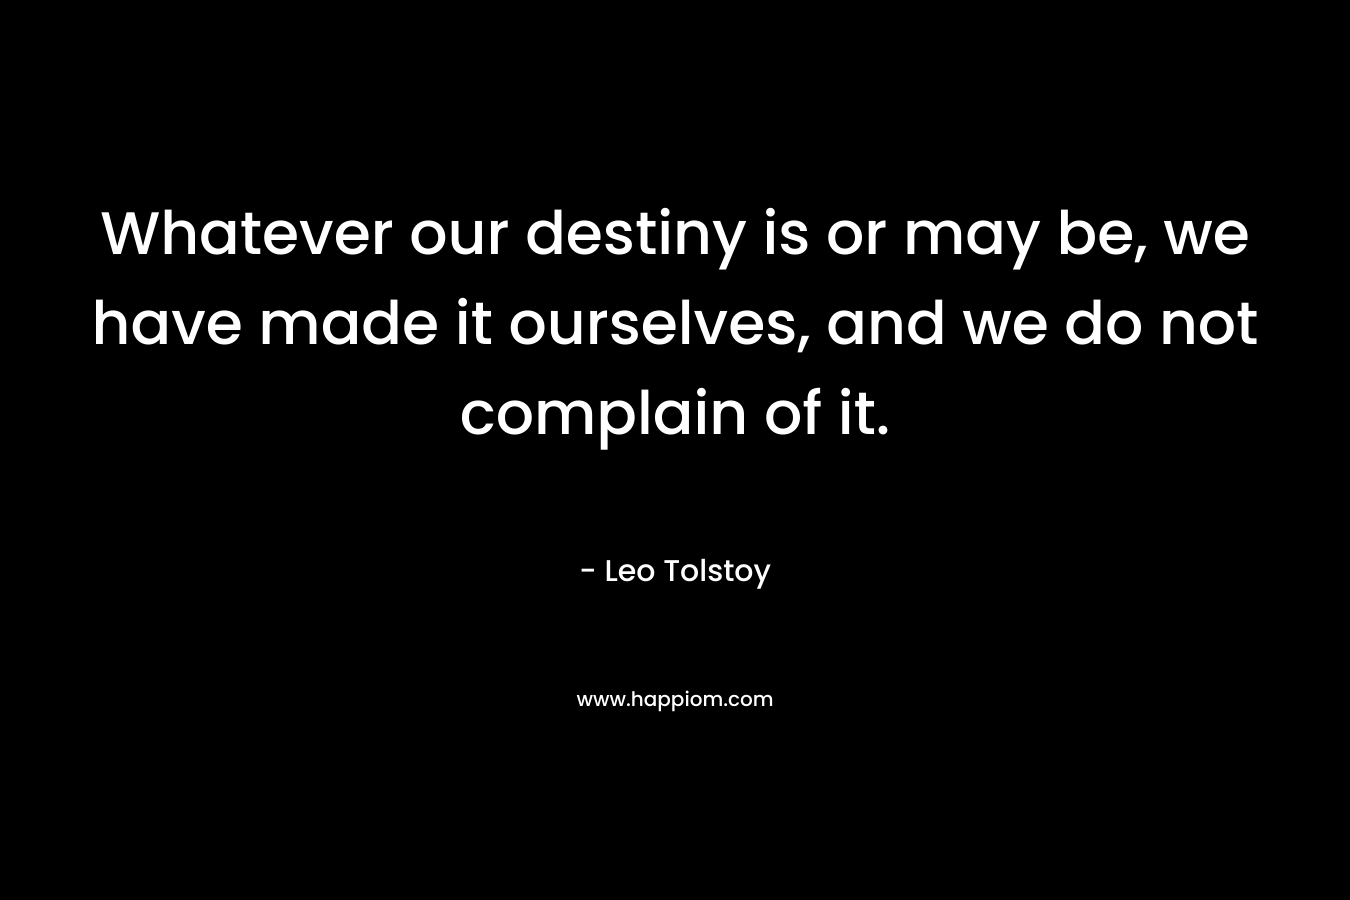 Whatever our destiny is or may be, we have made it ourselves, and we do not complain of it.